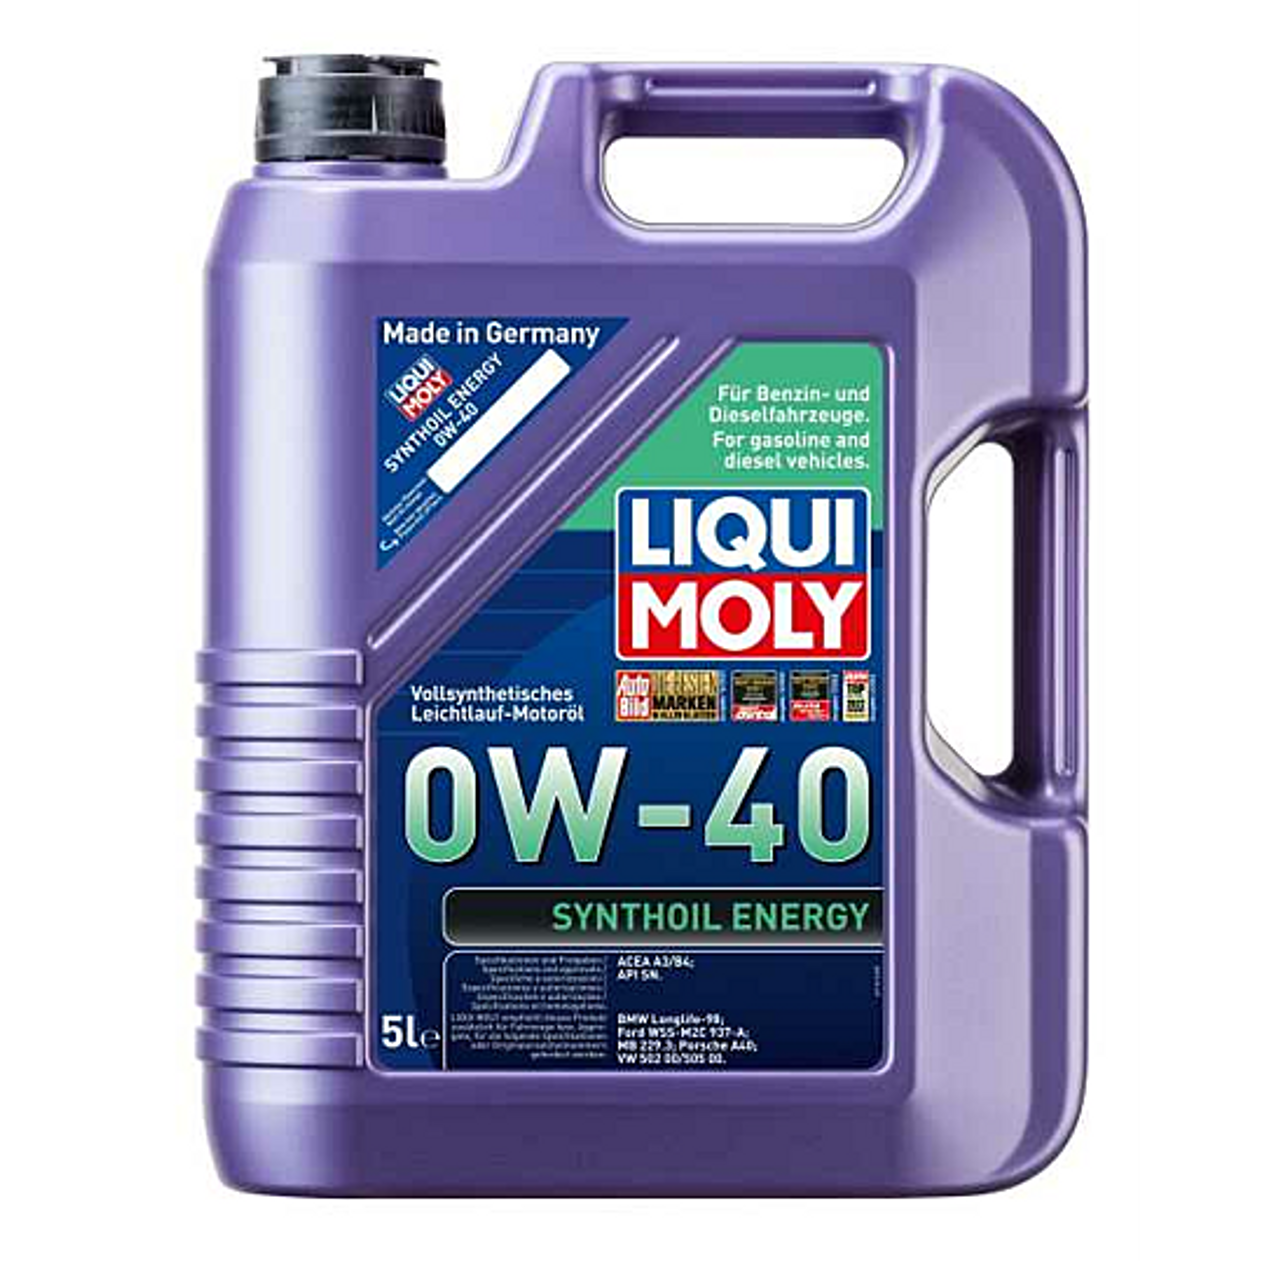 OIL LIQUI MOLY 0W-40 5L SYNTHOIL ENERGY 9515 A. Ally  Sons